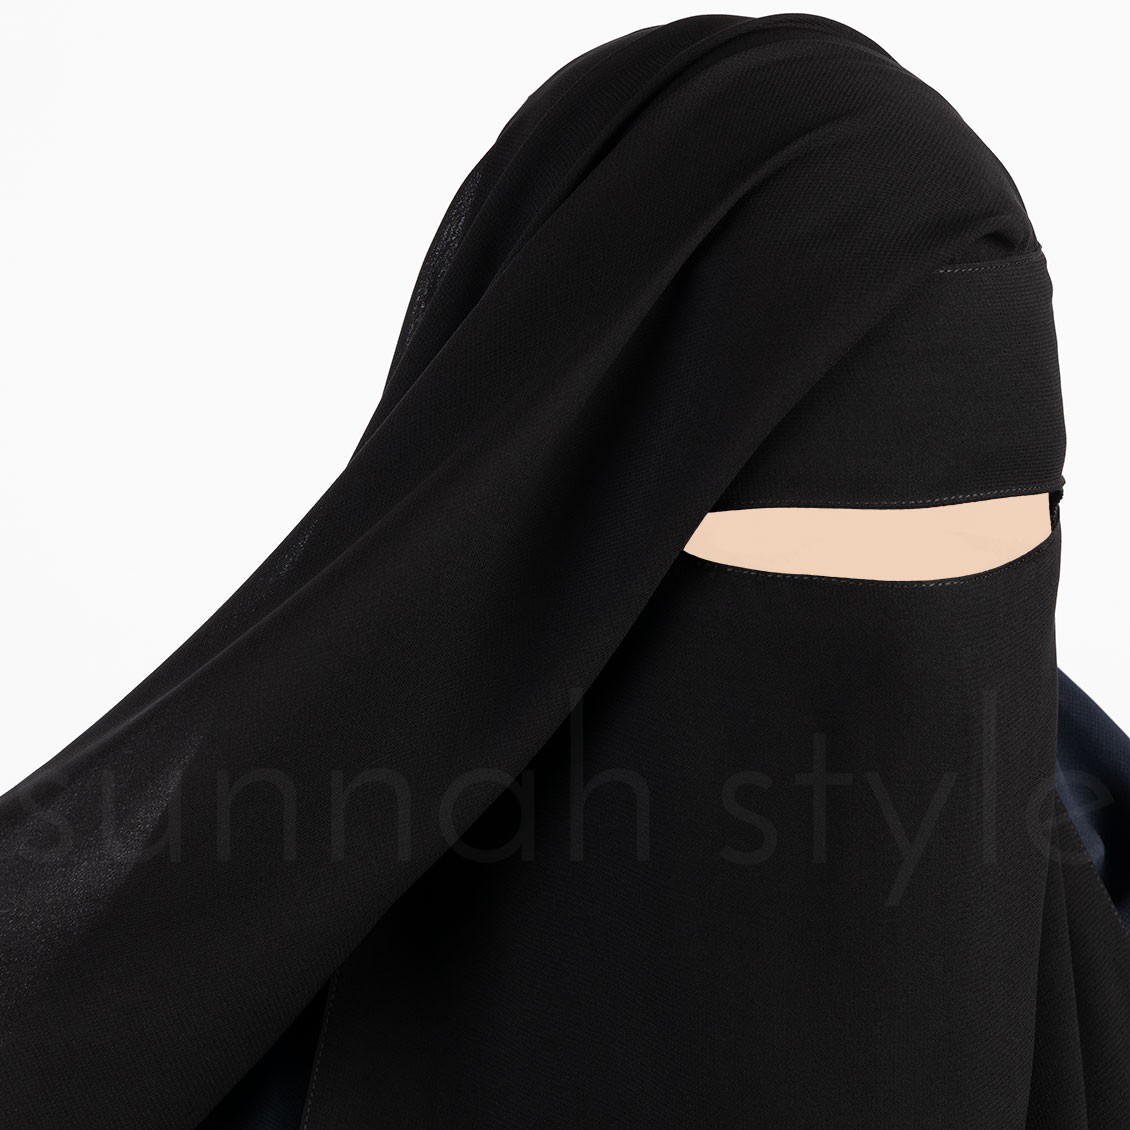 Sunnah Style Two Layer Niqab Black